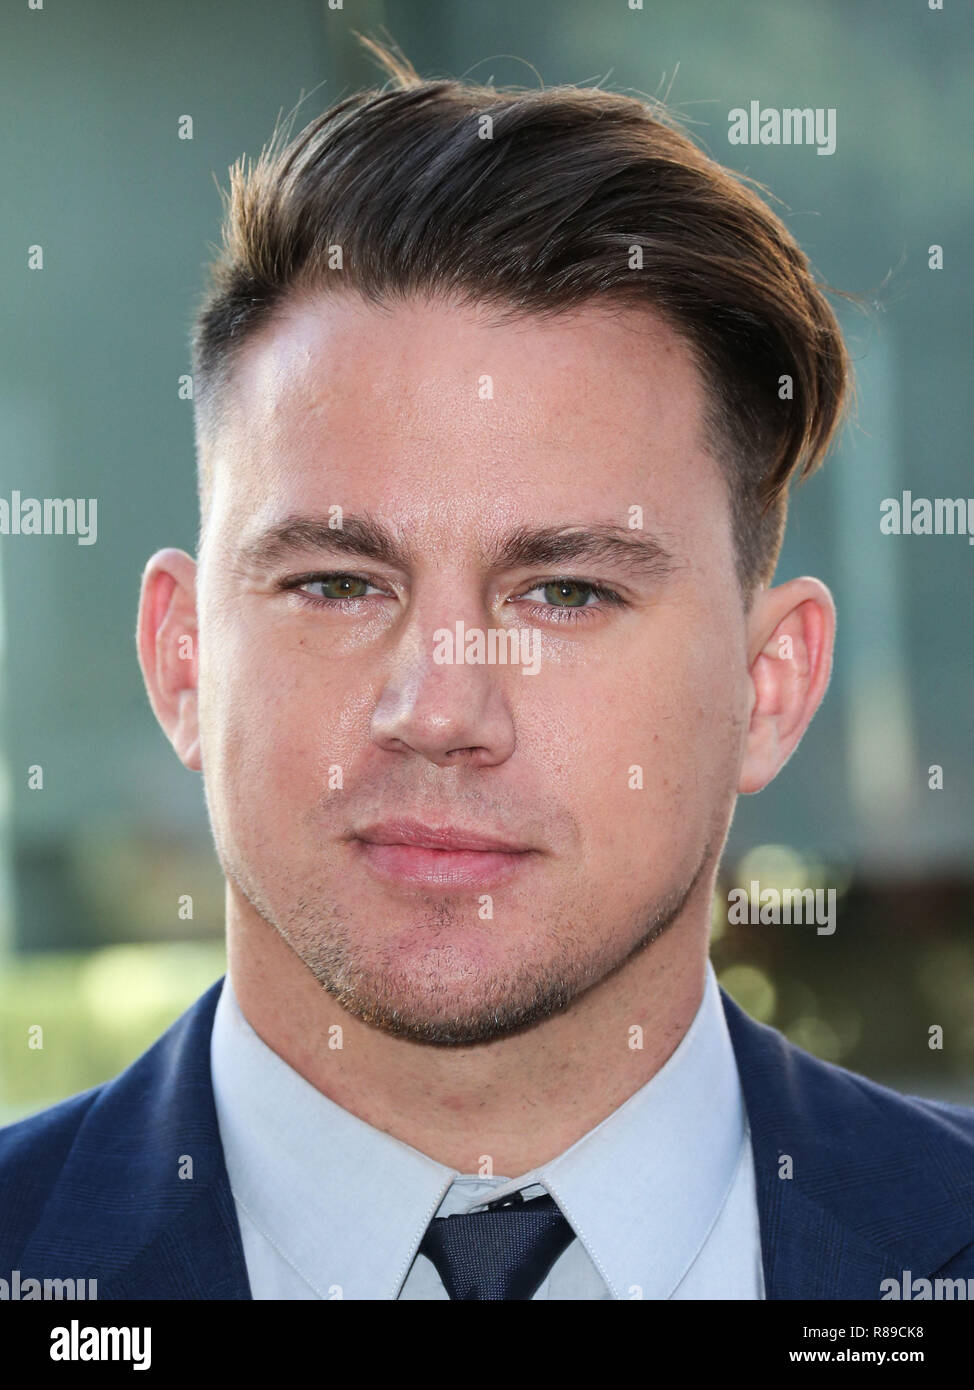 (FILE) Channing Tatum and Jessie J Are Reportedly Having Fun, but Taking Their Relationship Slow. Channing Tatum and Jessie J are keeping their romance low-key. According to People, the couple are 'spending time together,' but they want their relationship to remain out of the spotlight. LOS ANGELES, CA, USA - AUGUST 01: Actor Channing Tatum arrives at the 4th Annual Celebration Of Dance Gala Presented By The Dizzy Feet Foundation held at Club Nokia L.A. Live on August 1, 2015 in Los Angeles, California, United States. (Photo by Xavier Collin/Image Press Agency) Stock Photo